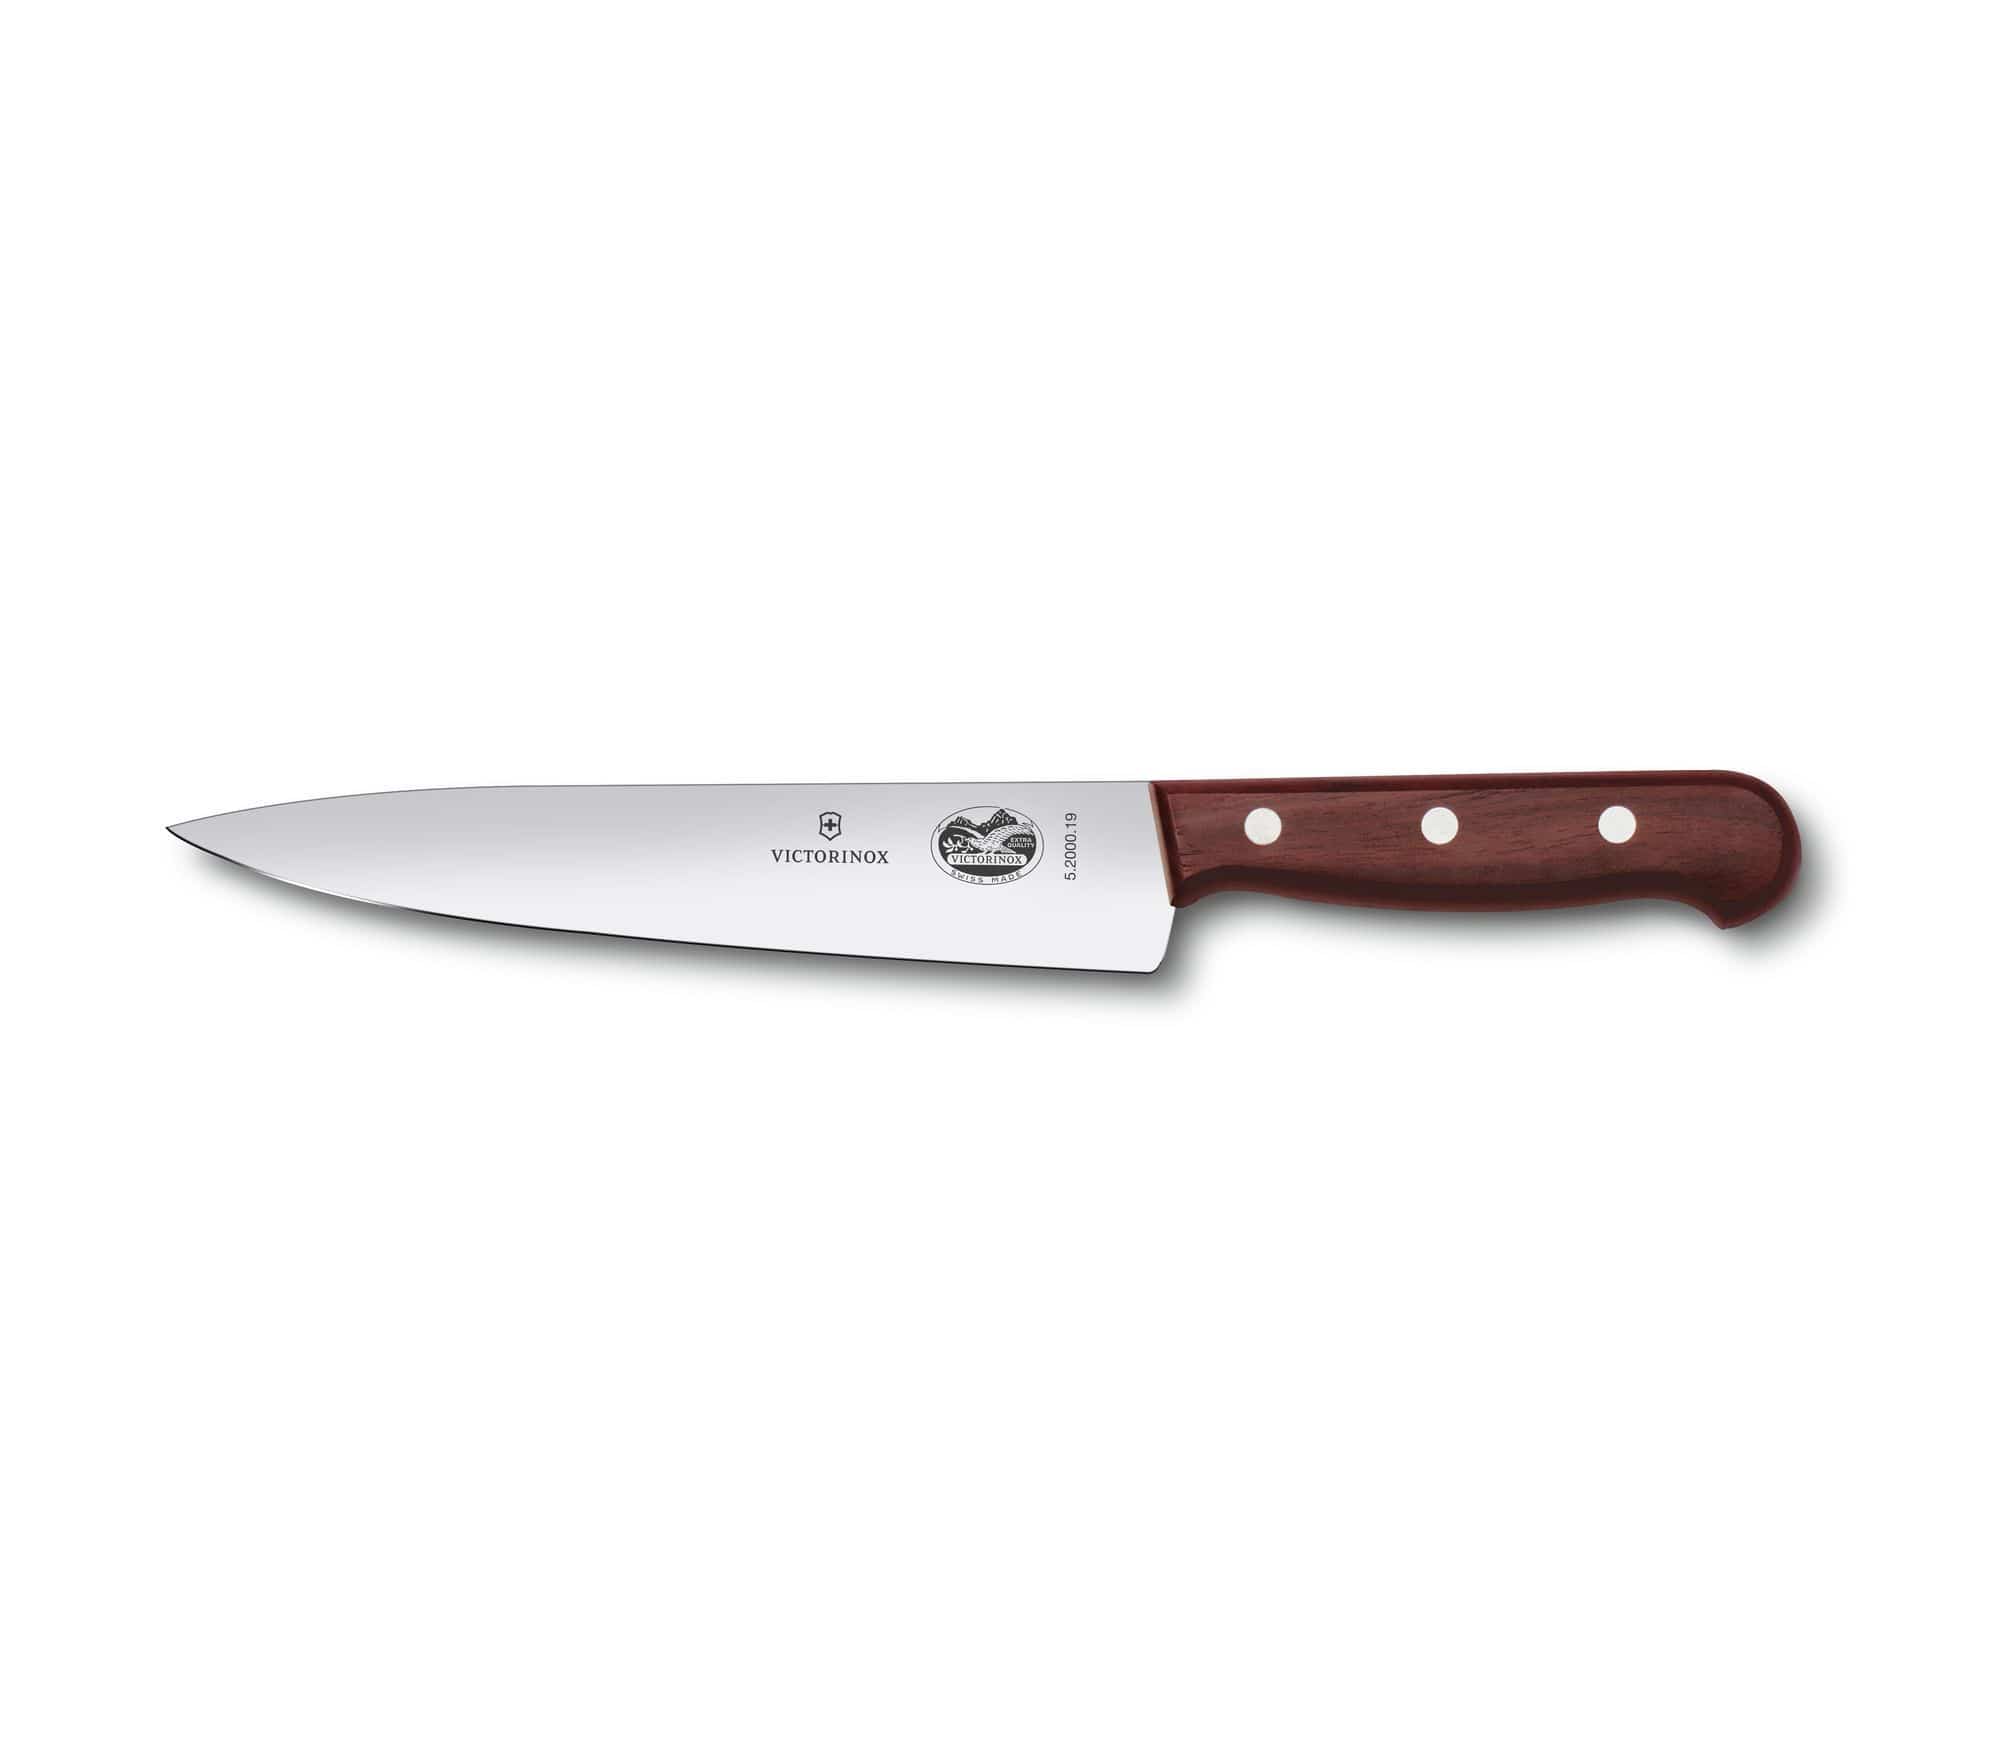 VICTORINOX ROSEWOOD CARVING KNIFE 19 CM GIFT BOX - 5.2000.19G